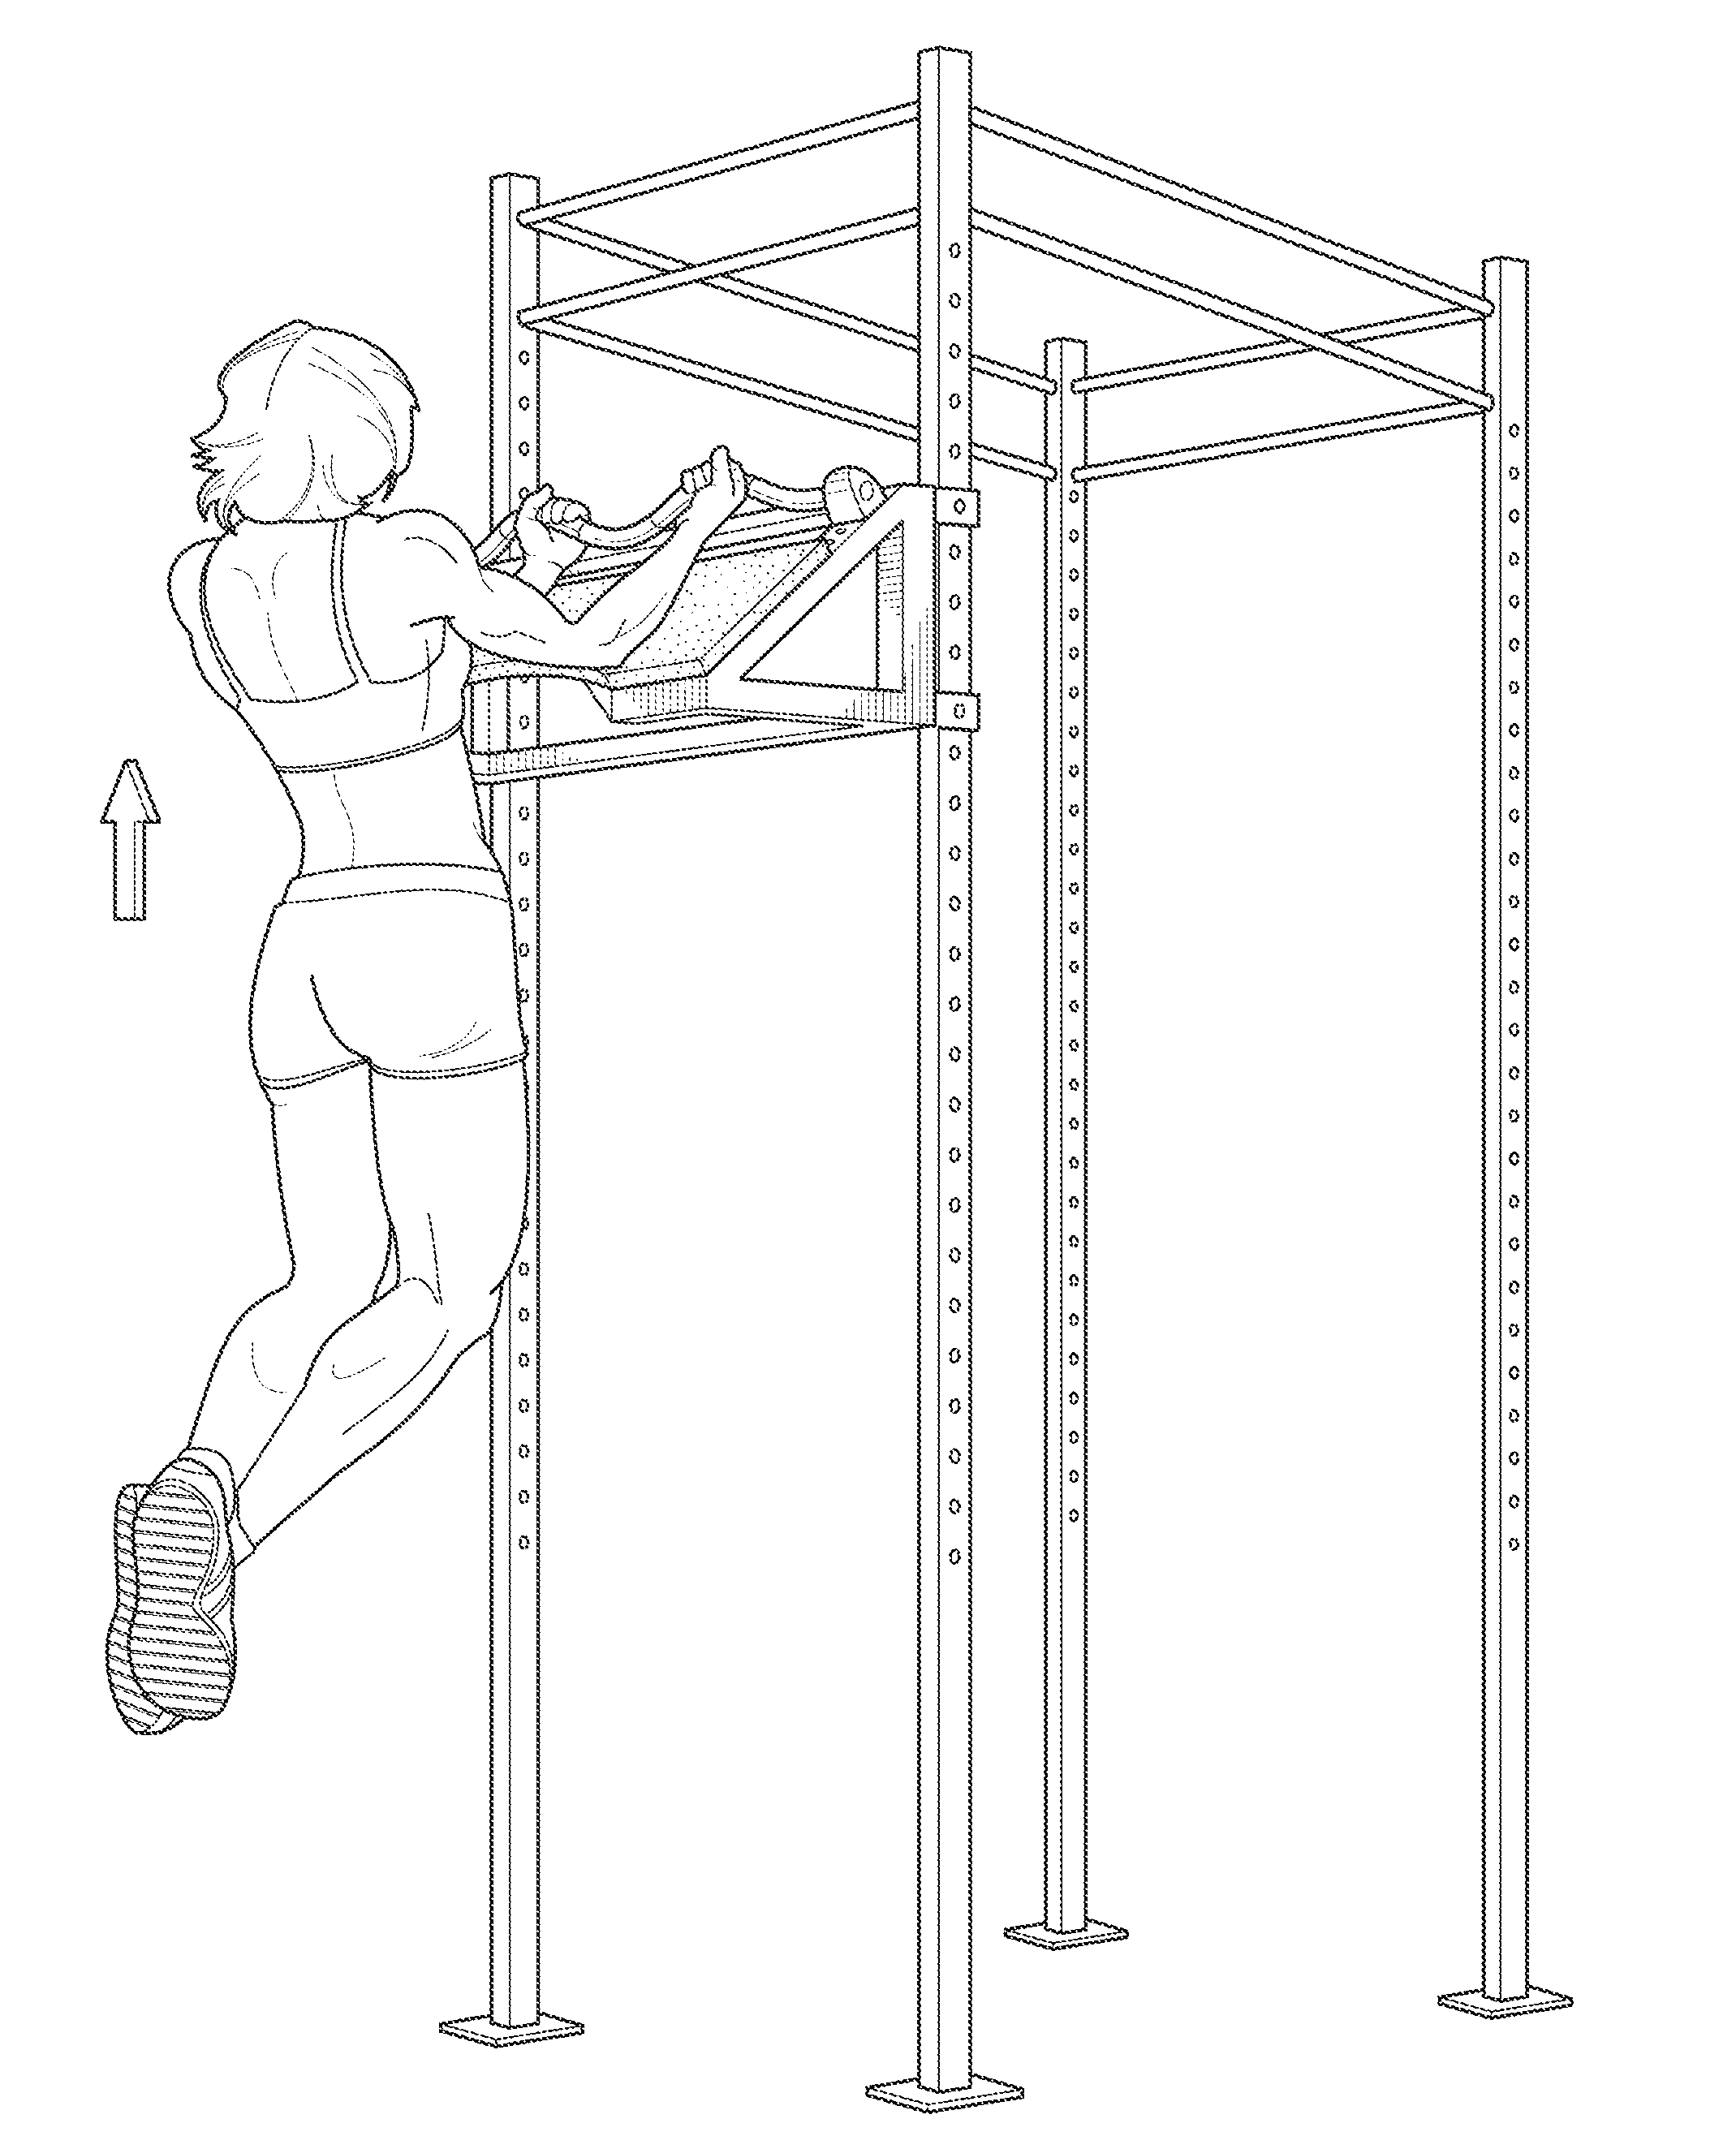 Isolated Upper-body Exercise Device